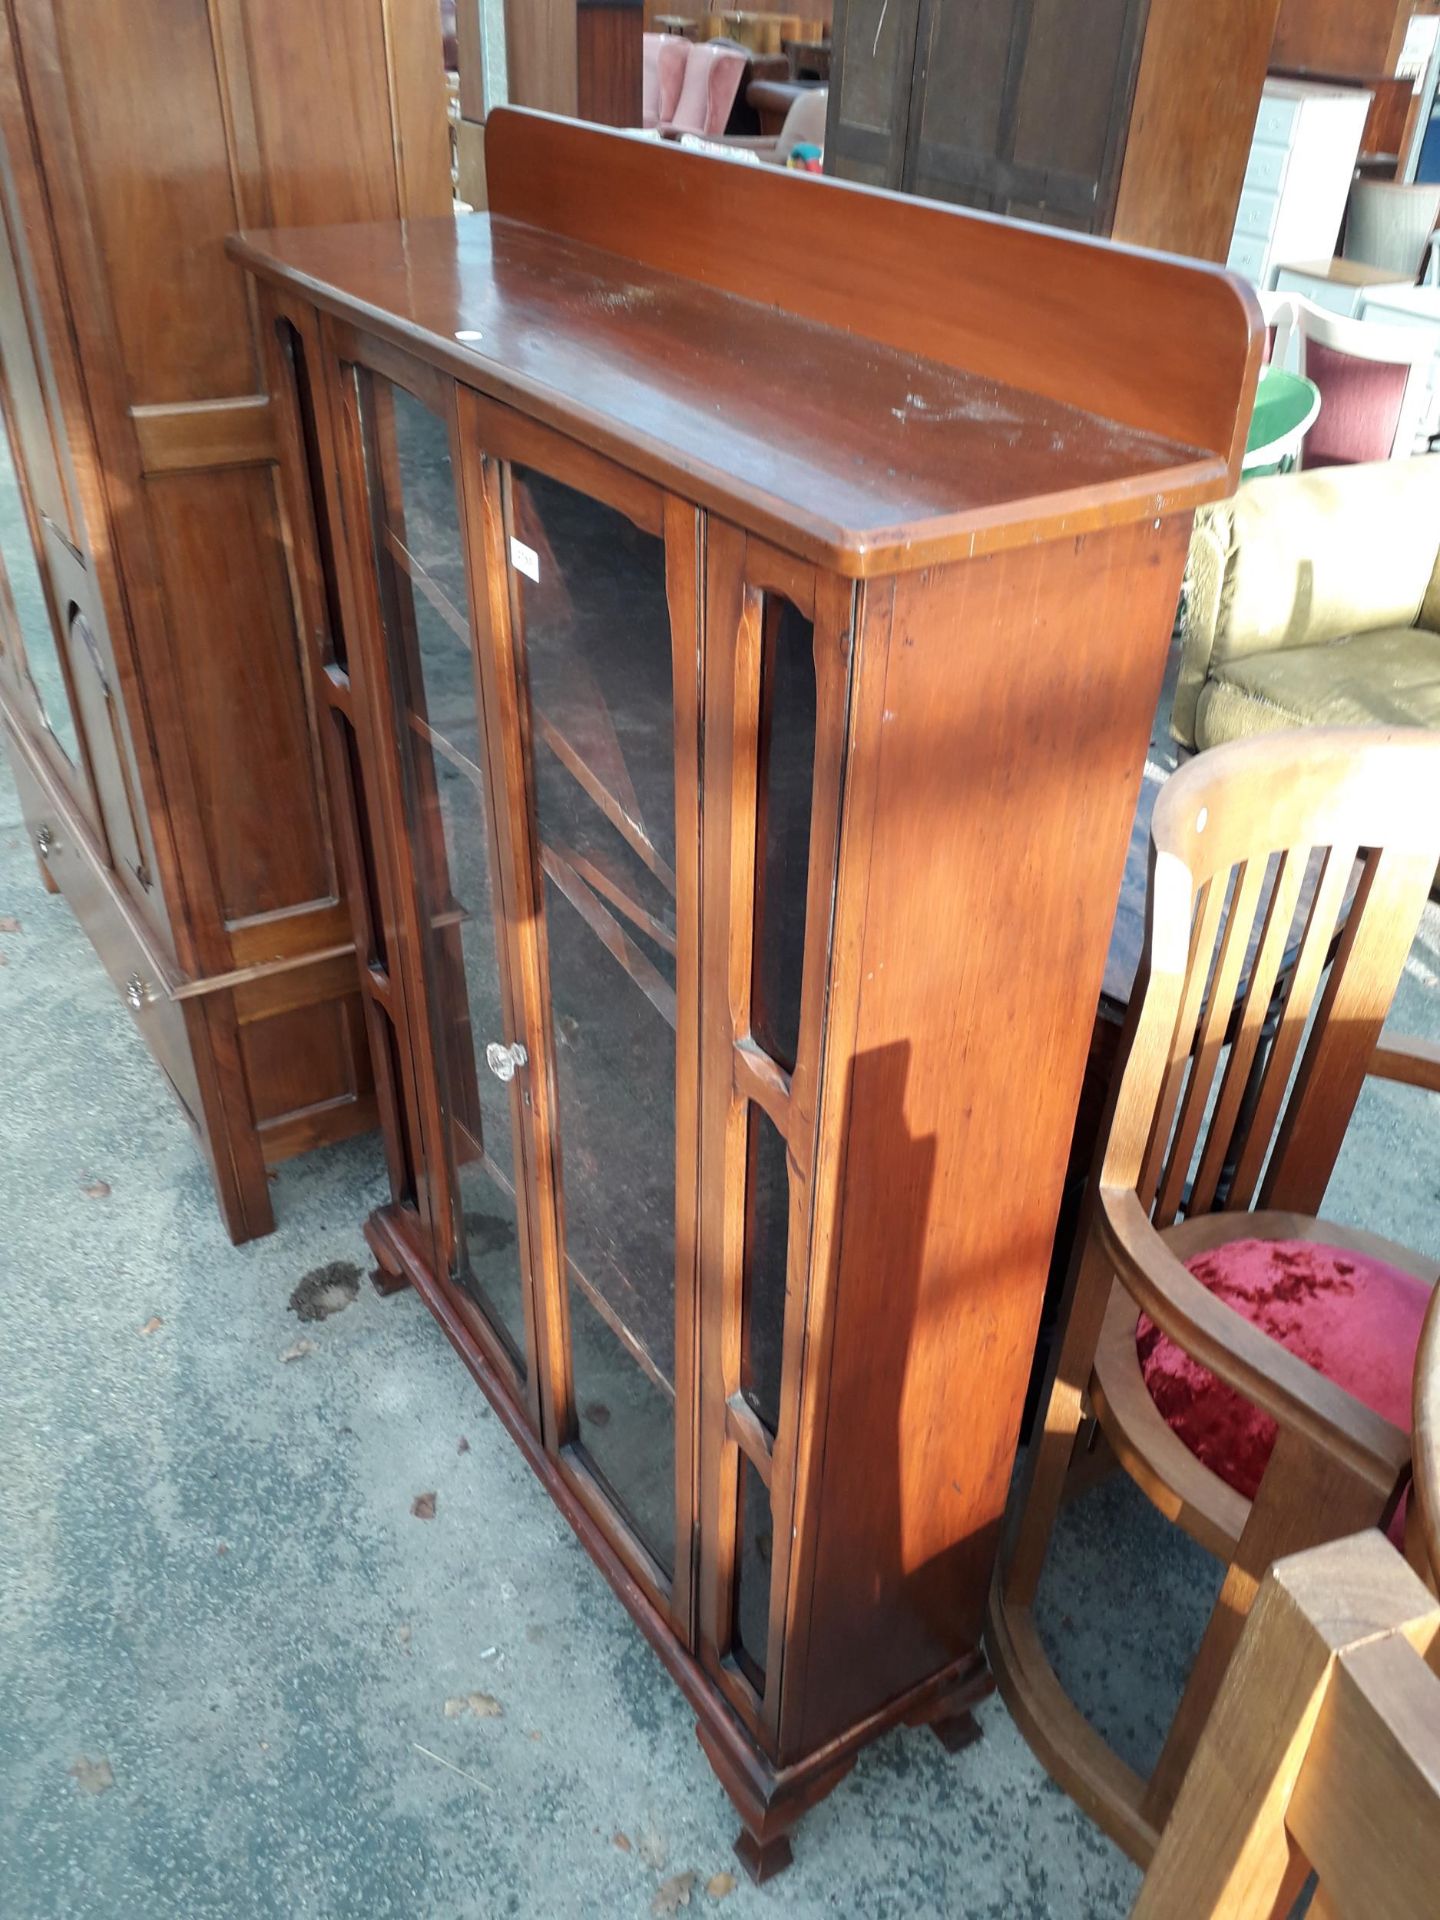 AN EARLY 20TH CENTURY MAHOGANY TWO DOOR DISPLAY CABINET, 38" WIDE - Image 3 of 3